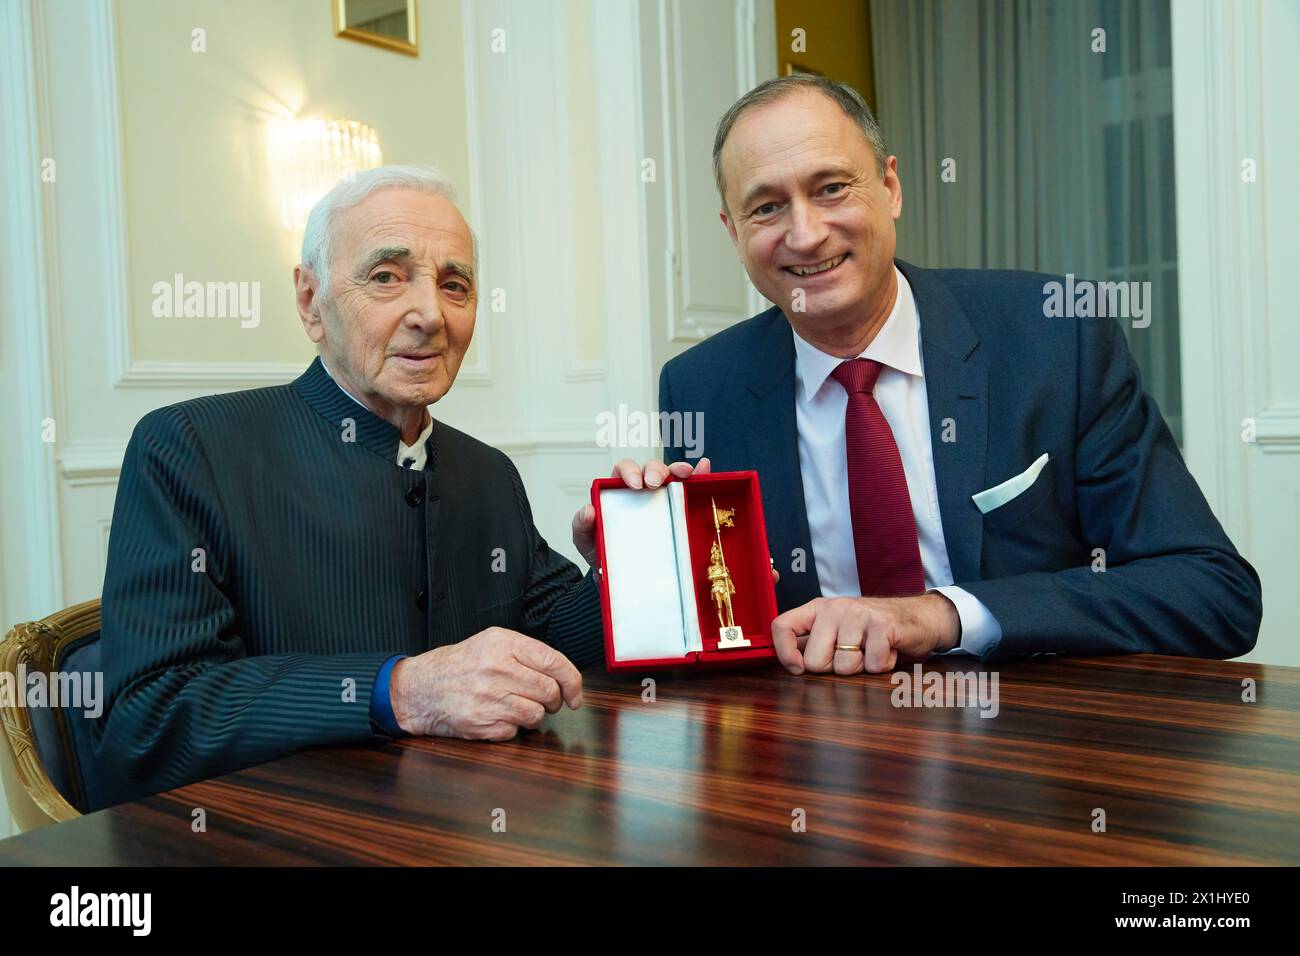 Chanson singer Charles AZNAVOUR receives the 'Golden Rathausmann', a Medal for Service to the City of Vienna from Andreas Mailath Pokorny, in Vienna, Austria, 8. December 2017. - 20171208 PD6860 - Rechteinfo: Rights Managed (RM) Stock Photo